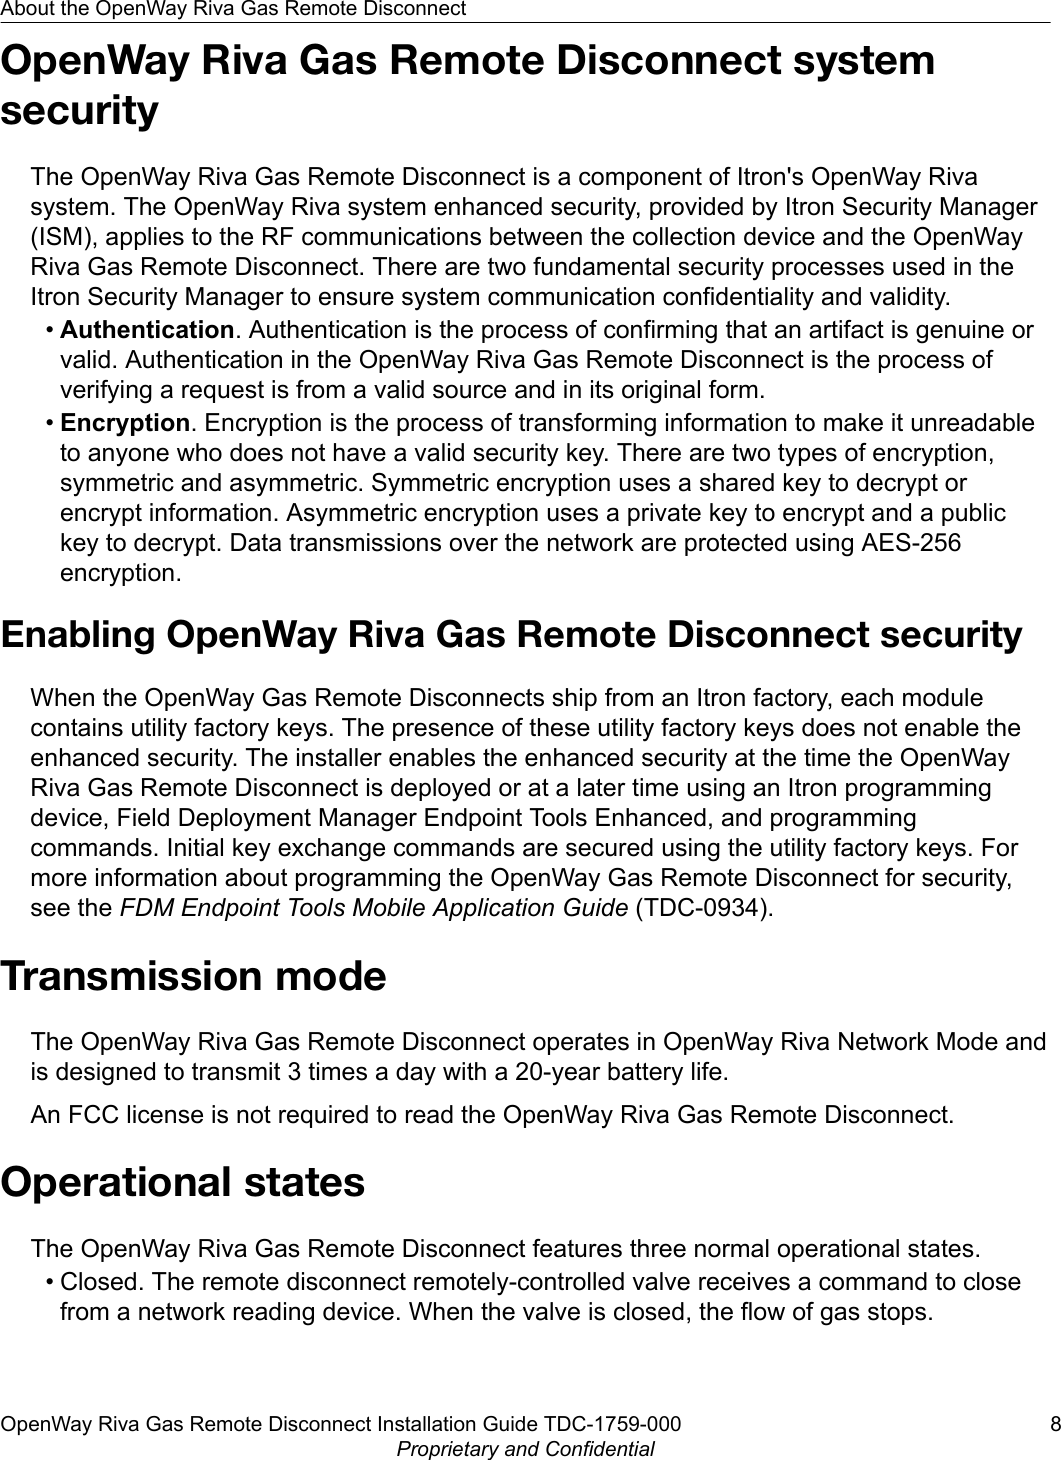 OpenWay Riva Gas Remote Disconnect systemsecurityThe OpenWay Riva Gas Remote Disconnect is a component of Itron&apos;s OpenWay Rivasystem. The OpenWay Riva system enhanced security, provided by Itron Security Manager(ISM), applies to the RF communications between the collection device and the OpenWayRiva Gas Remote Disconnect. There are two fundamental security processes used in theItron Security Manager to ensure system communication confidentiality and validity.•Authentication. Authentication is the process of confirming that an artifact is genuine orvalid. Authentication in the OpenWay Riva Gas Remote Disconnect is the process ofverifying a request is from a valid source and in its original form.•Encryption. Encryption is the process of transforming information to make it unreadableto anyone who does not have a valid security key. There are two types of encryption,symmetric and asymmetric. Symmetric encryption uses a shared key to decrypt orencrypt information. Asymmetric encryption uses a private key to encrypt and a publickey to decrypt. Data transmissions over the network are protected using AES-256encryption.Enabling OpenWay Riva Gas Remote Disconnect securityWhen the OpenWay Gas Remote Disconnects ship from an Itron factory, each modulecontains utility factory keys. The presence of these utility factory keys does not enable theenhanced security. The installer enables the enhanced security at the time the OpenWayRiva Gas Remote Disconnect is deployed or at a later time using an Itron programmingdevice, Field Deployment Manager Endpoint Tools Enhanced, and programmingcommands. Initial key exchange commands are secured using the utility factory keys. Formore information about programming the OpenWay Gas Remote Disconnect for security,see the FDM Endpoint Tools Mobile Application Guide (TDC-0934).Transmission modeThe OpenWay Riva Gas Remote Disconnect operates in OpenWay Riva Network Mode andis designed to transmit 3 times a day with a 20-year battery life.An FCC license is not required to read the OpenWay Riva Gas Remote Disconnect.Operational statesThe OpenWay Riva Gas Remote Disconnect features three normal operational states.• Closed. The remote disconnect remotely-controlled valve receives a command to closefrom a network reading device. When the valve is closed, the flow of gas stops.About the OpenWay Riva Gas Remote DisconnectOpenWay Riva Gas Remote Disconnect Installation Guide TDC-1759-000 8Proprietary and Confidential